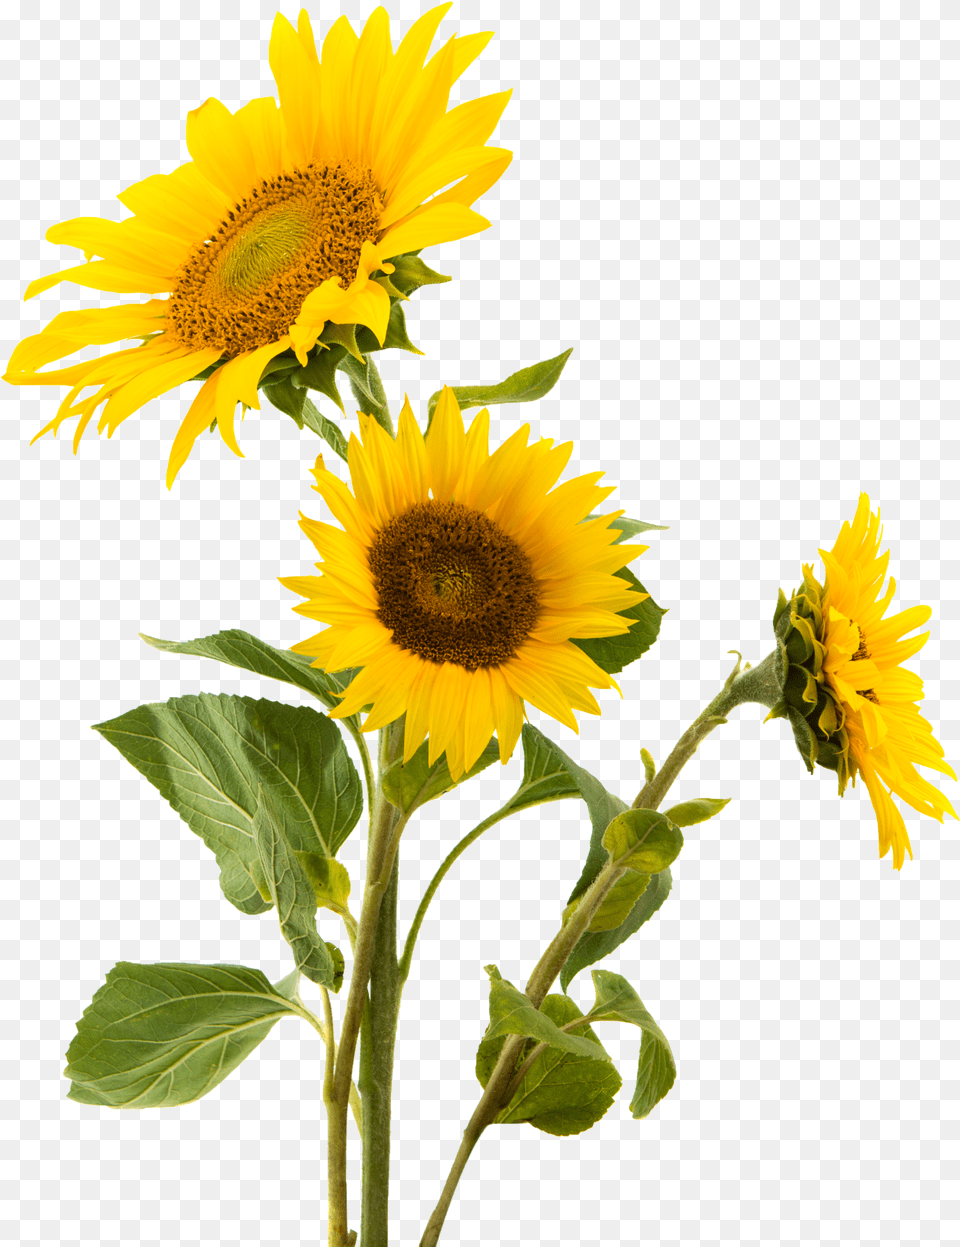 Snack Gluten Sunflower Nut Seed Sunflowers Common Clipart Sunflower Free Transparent Png